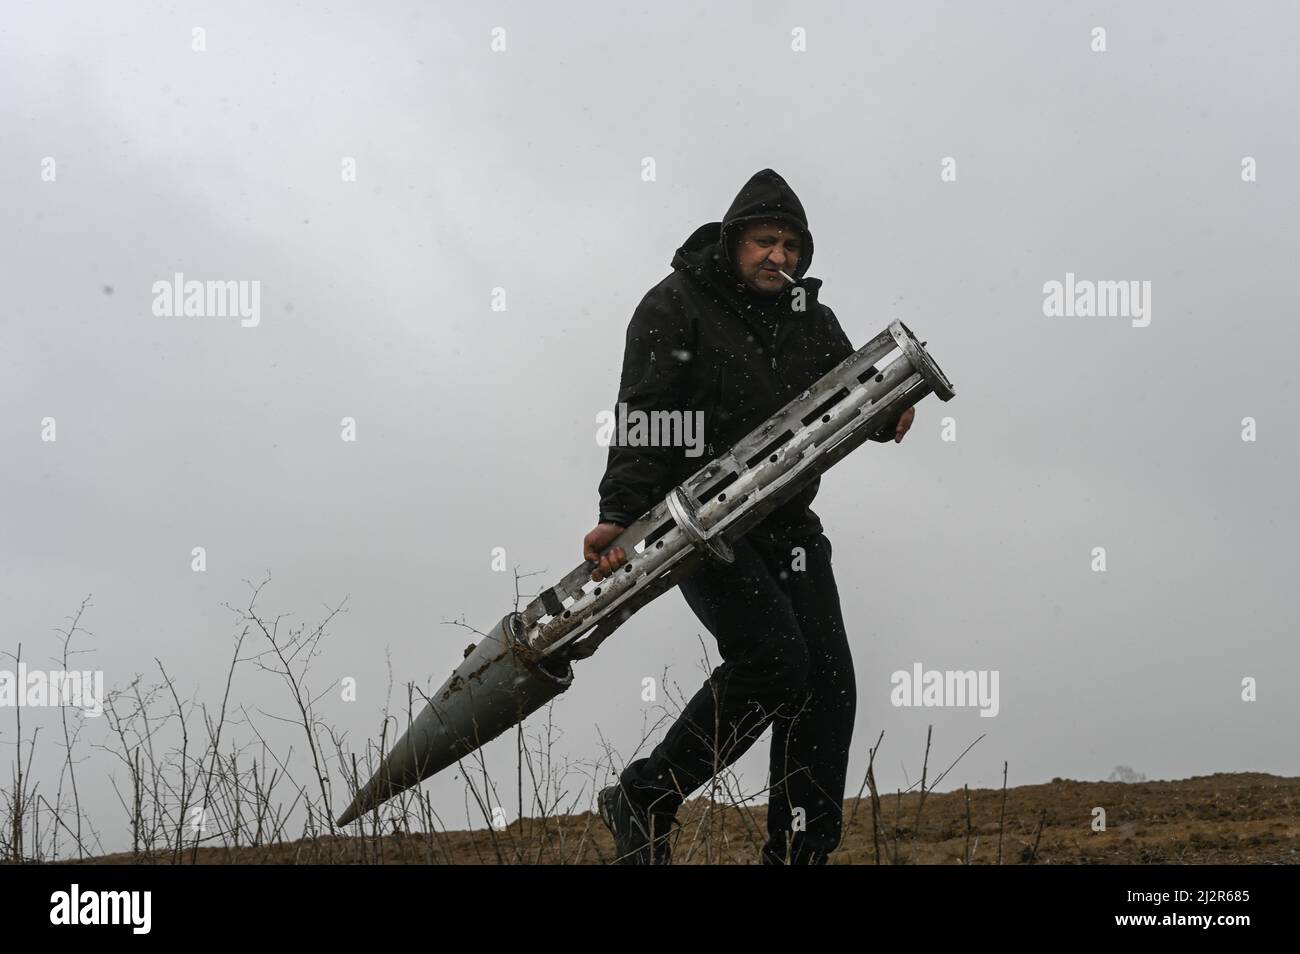 Ukraine. 03rd Apr, 2022. A Ukrainian civilian Gennadiy removes a Russian cluster munition rocket from a field near the villages of Smolyanka and Olyshivka after shelling in the previous nights, in the Chernihiv Oblast on April 3rd, 2022. Olyshivka, Ukraine. Russian military forces entered Ukraine territory on Feb. 24, 2022. (Photo by Justin Yau/Sipa USA) Credit: Sipa USA/Alamy Live News Stock Photo